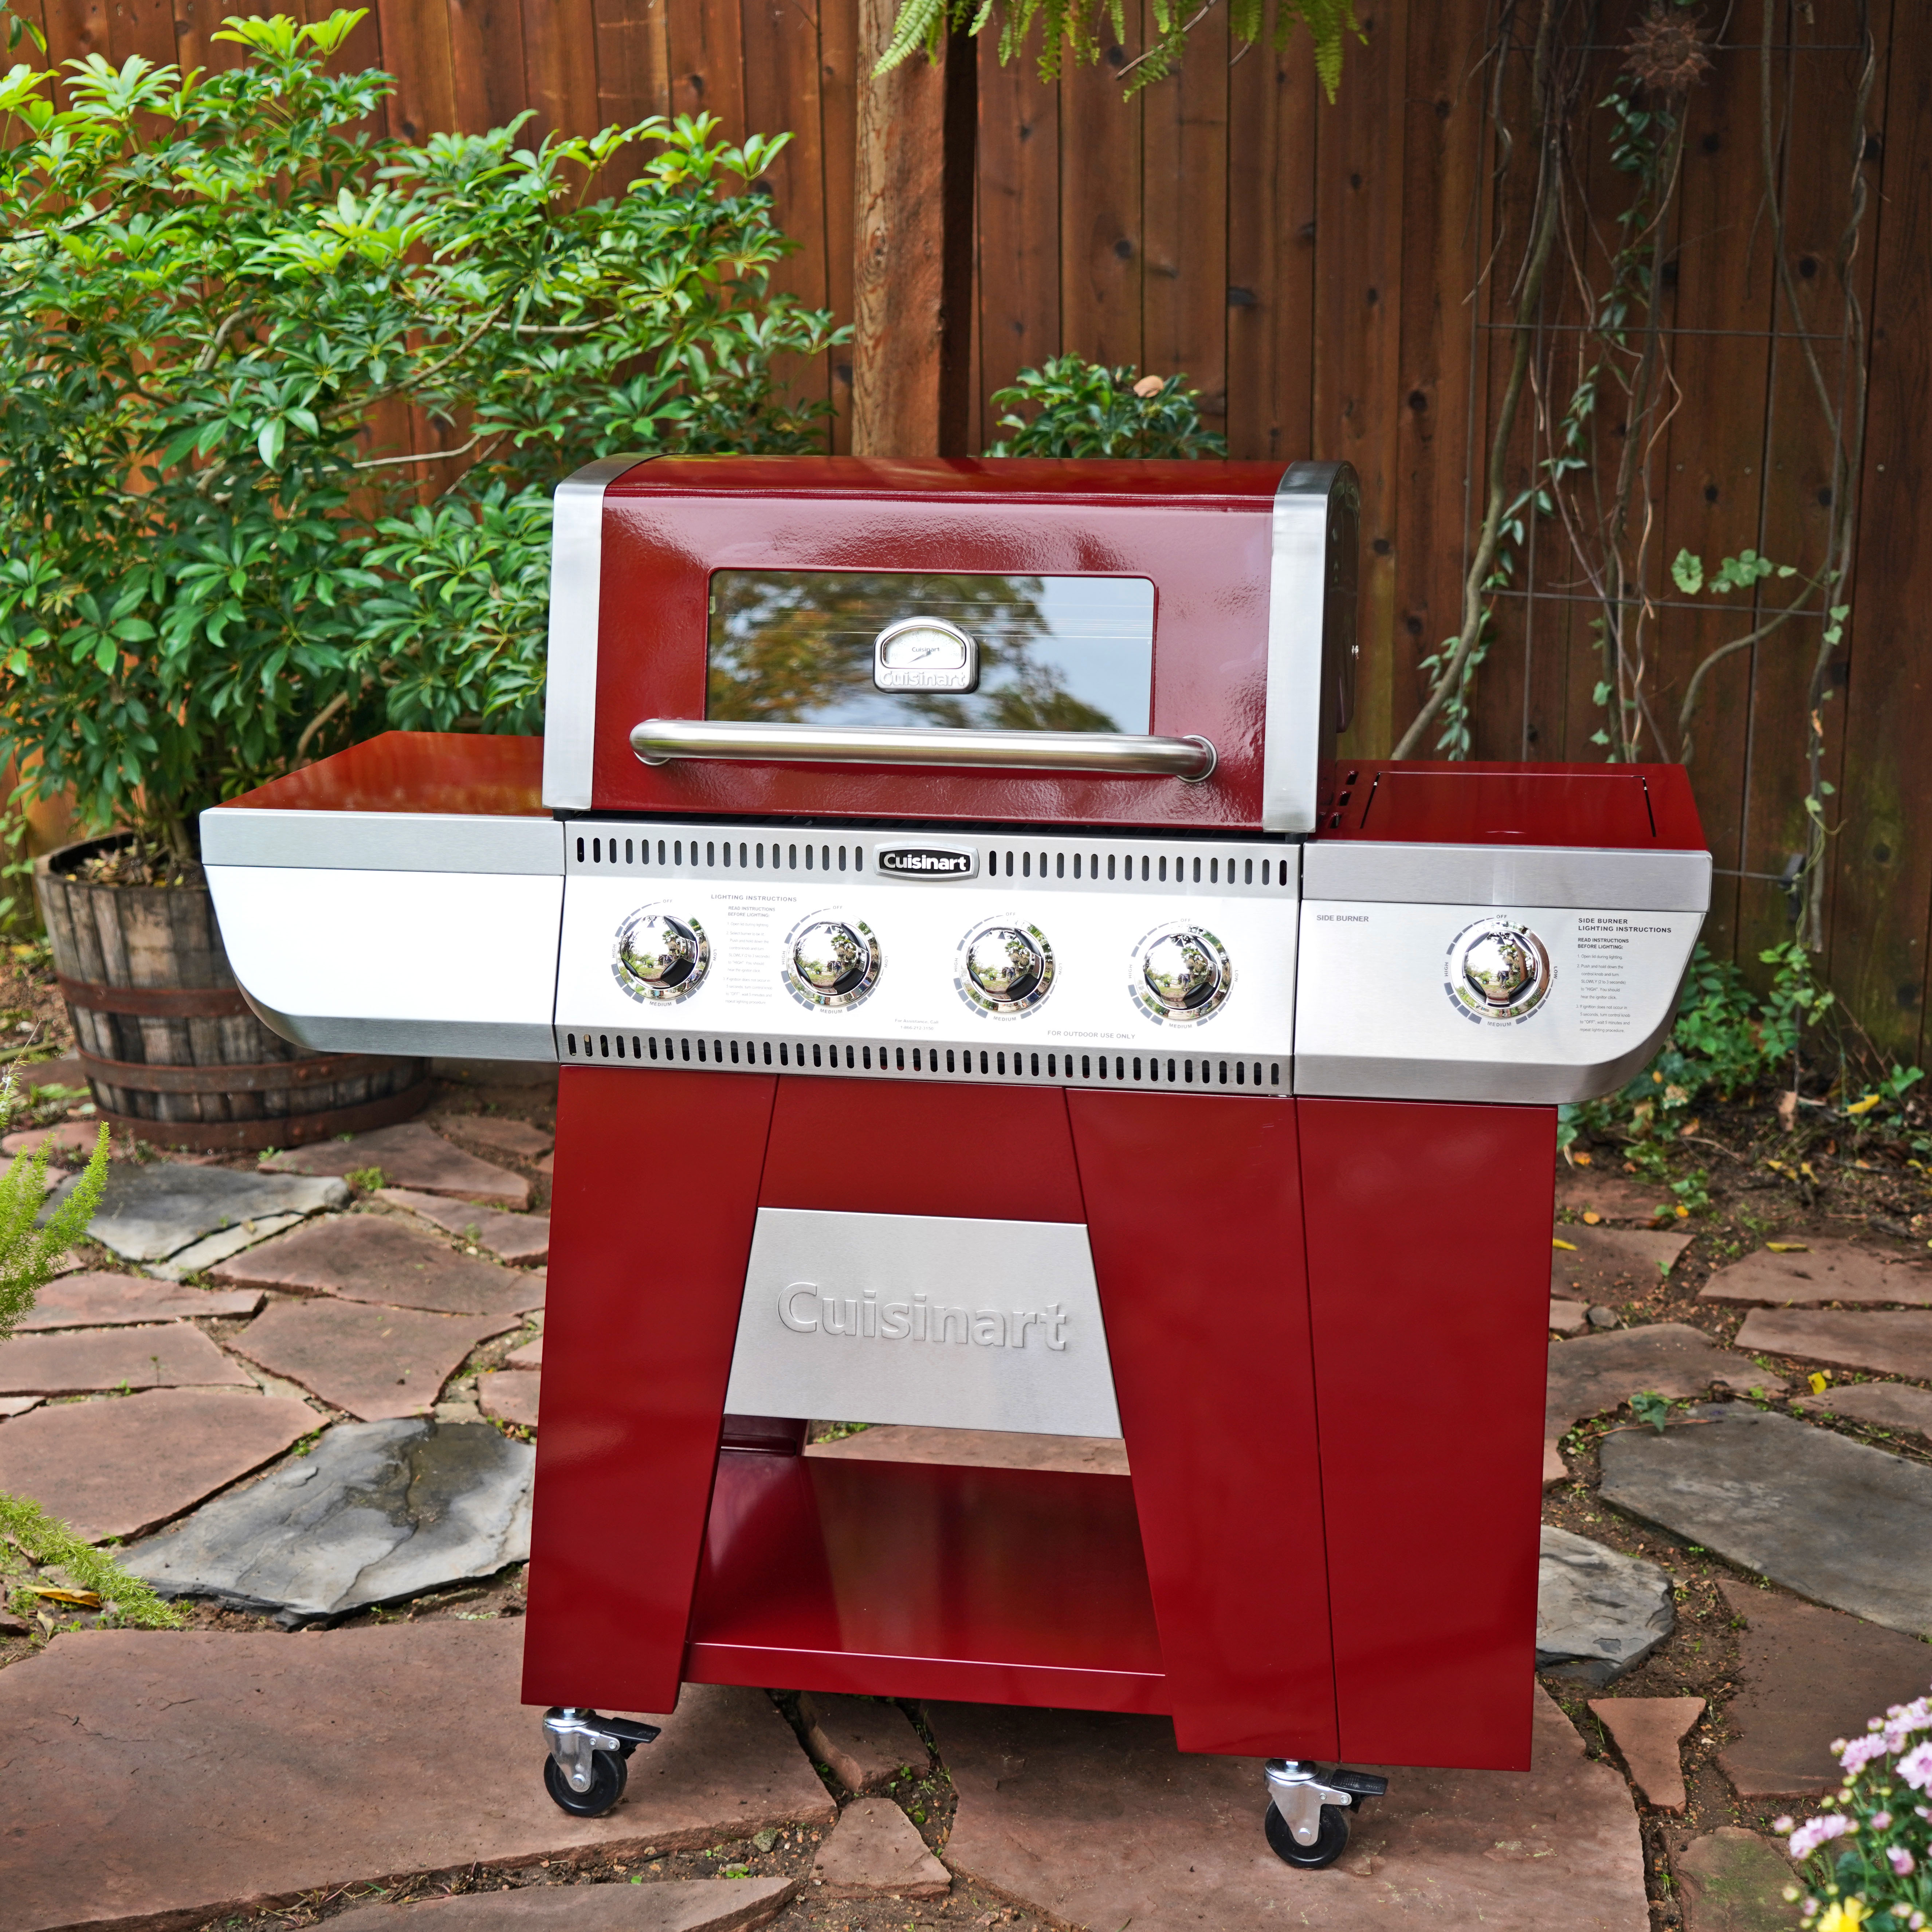 Discontinued Cuisinart Deluxe Four Burner Gas Grill - Dual Fuel Valves